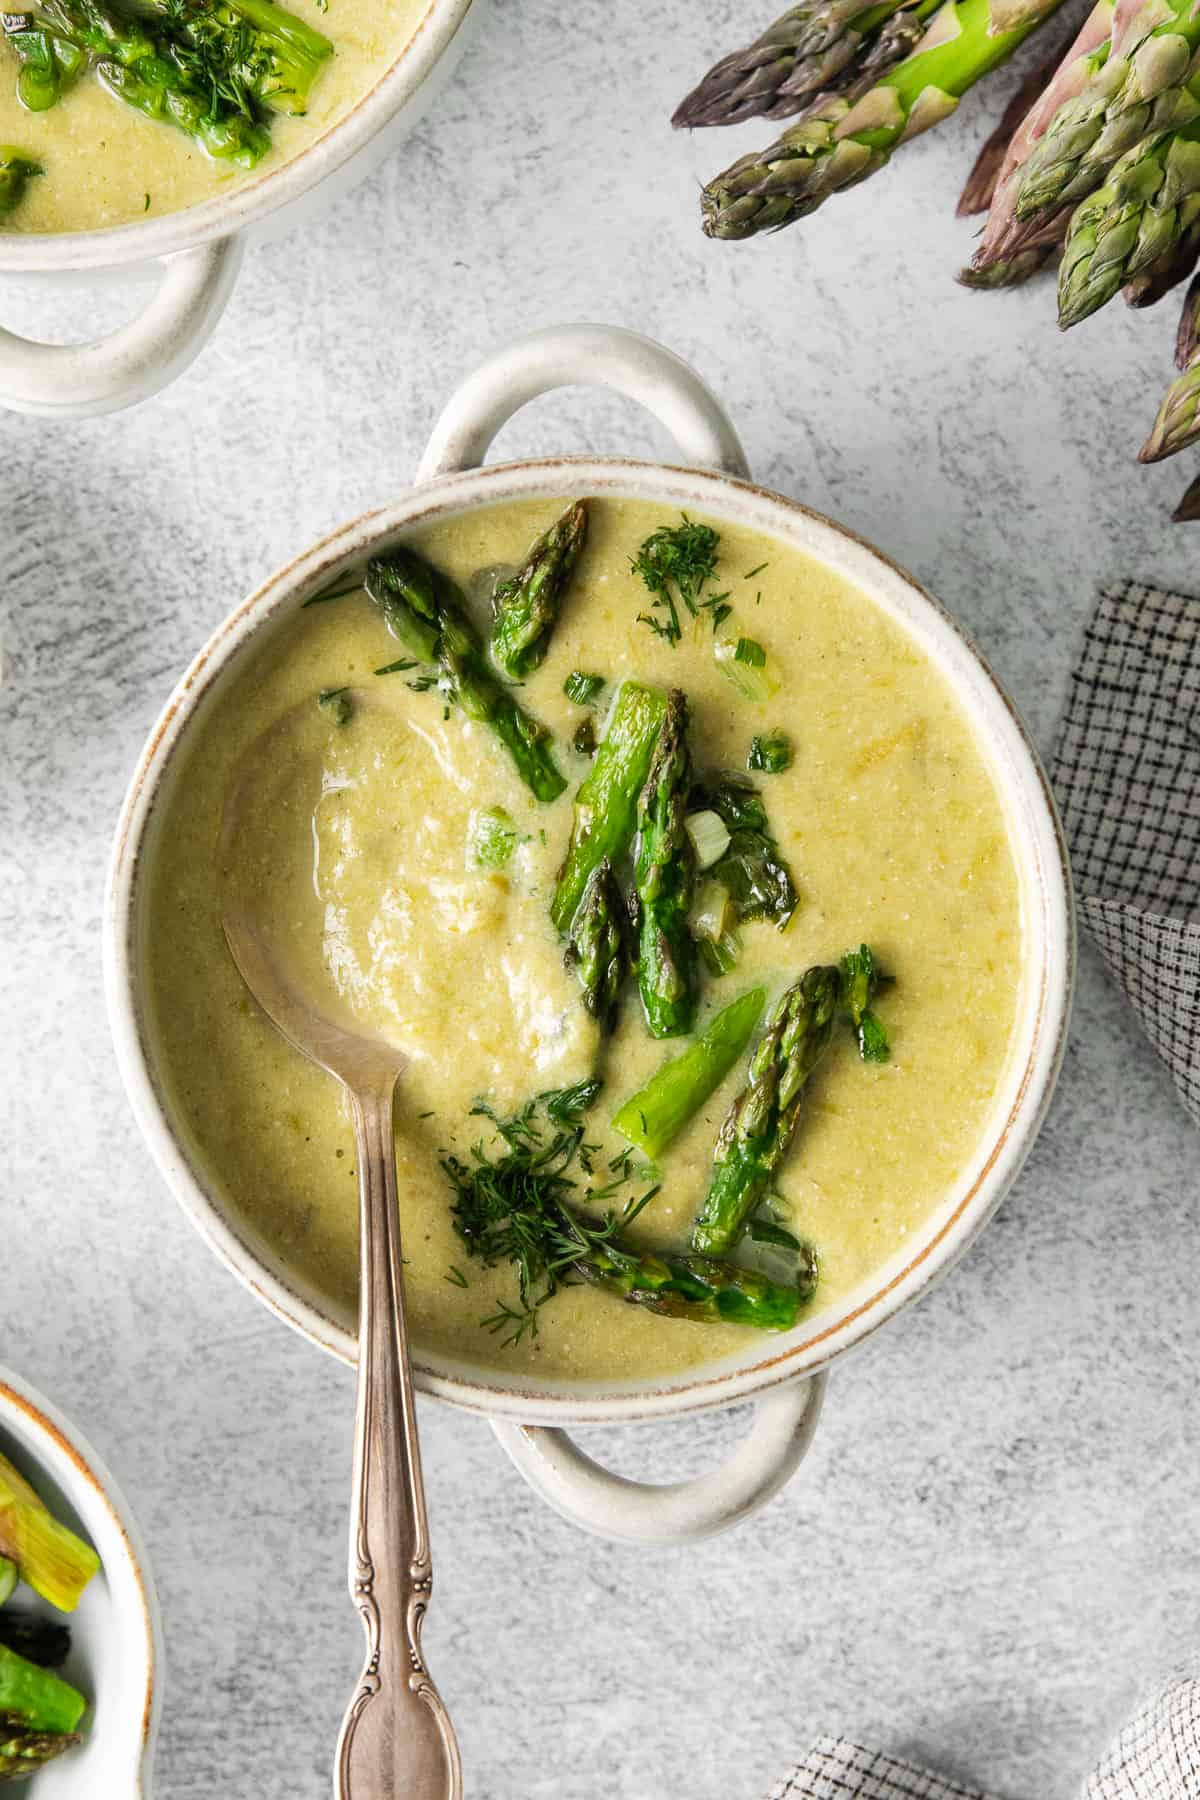 Cream of asparagus soup in a bowl.